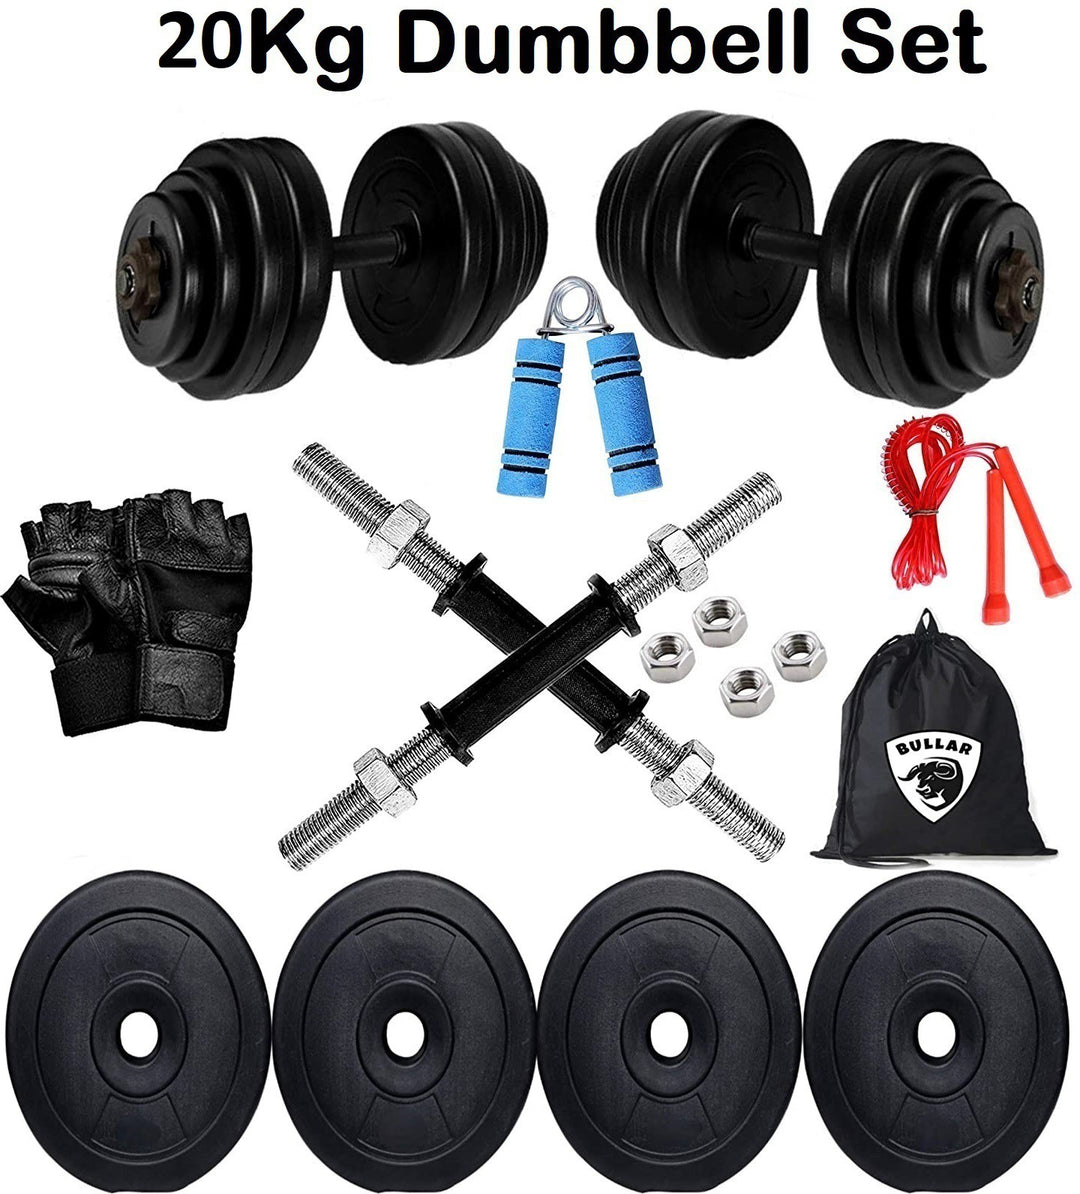 Dumbbell Set | Weight Plates | Weight Plates for Home Gym  | 20Kg Dumbbell Set With Acc.